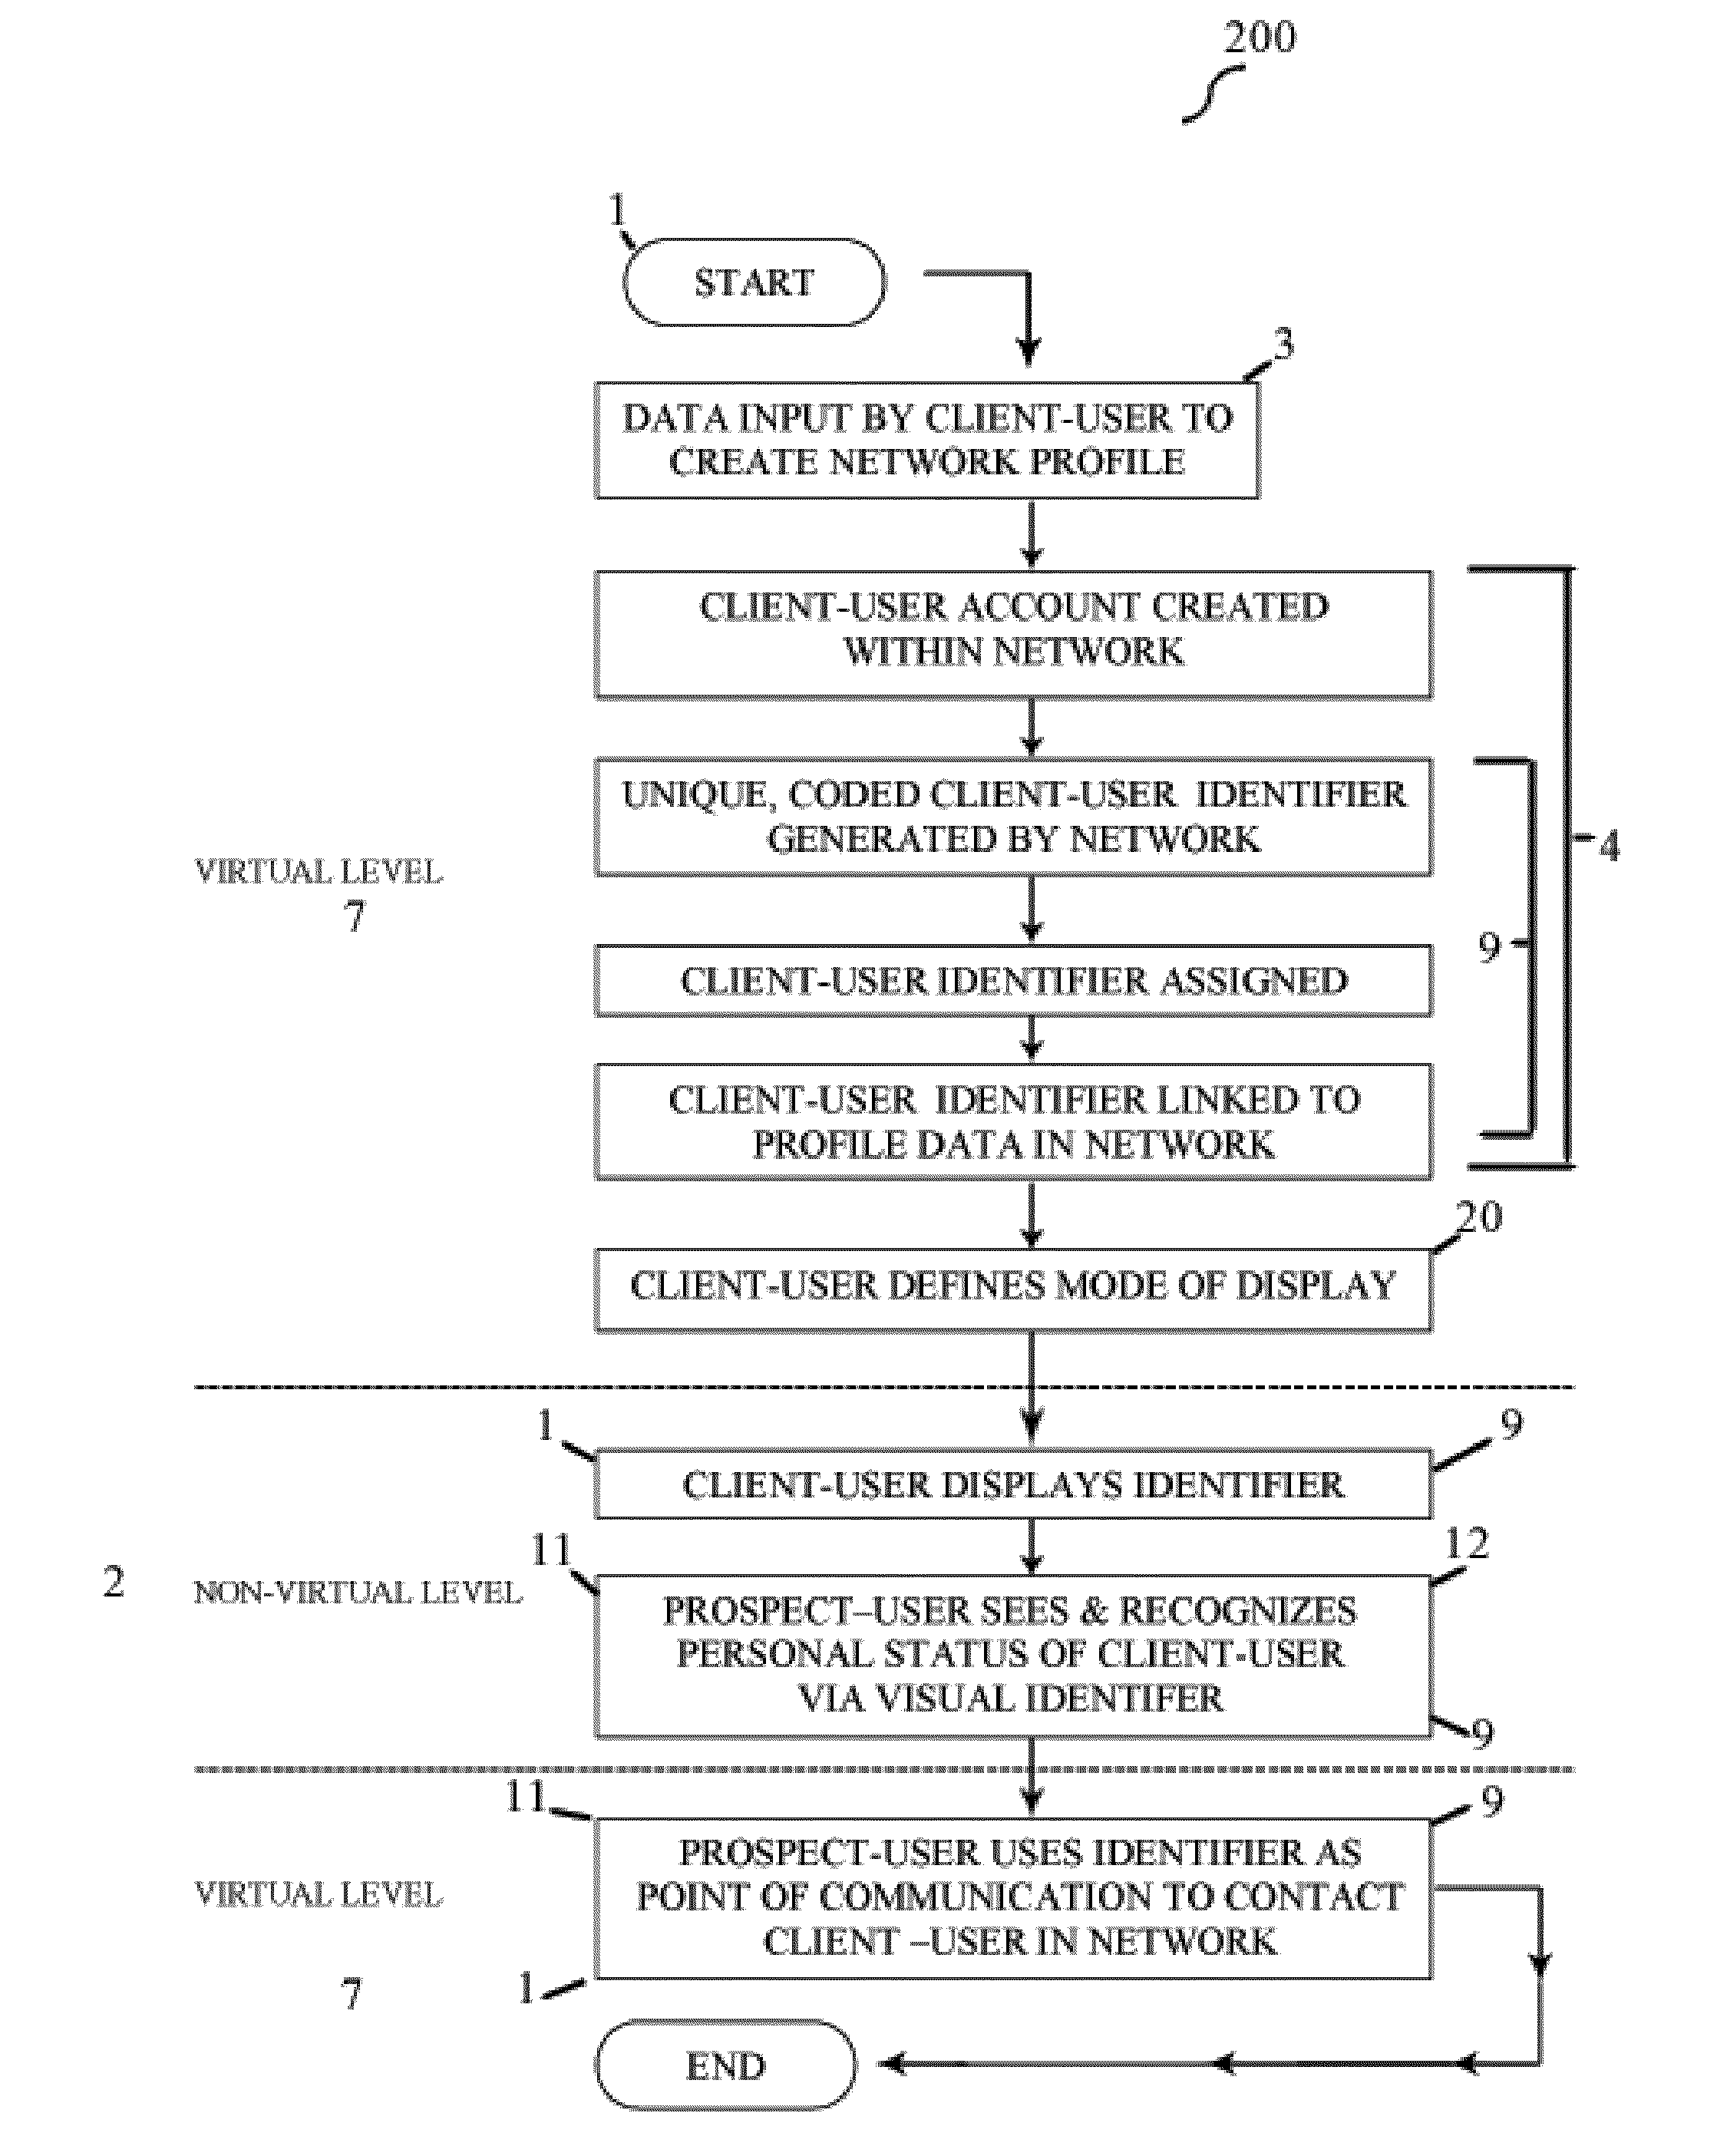 Method, apparatus and system of unique, coded, visual identifiers that provide a point of contact between people for communication and exchange of information bridging non-virtual and virtual environments